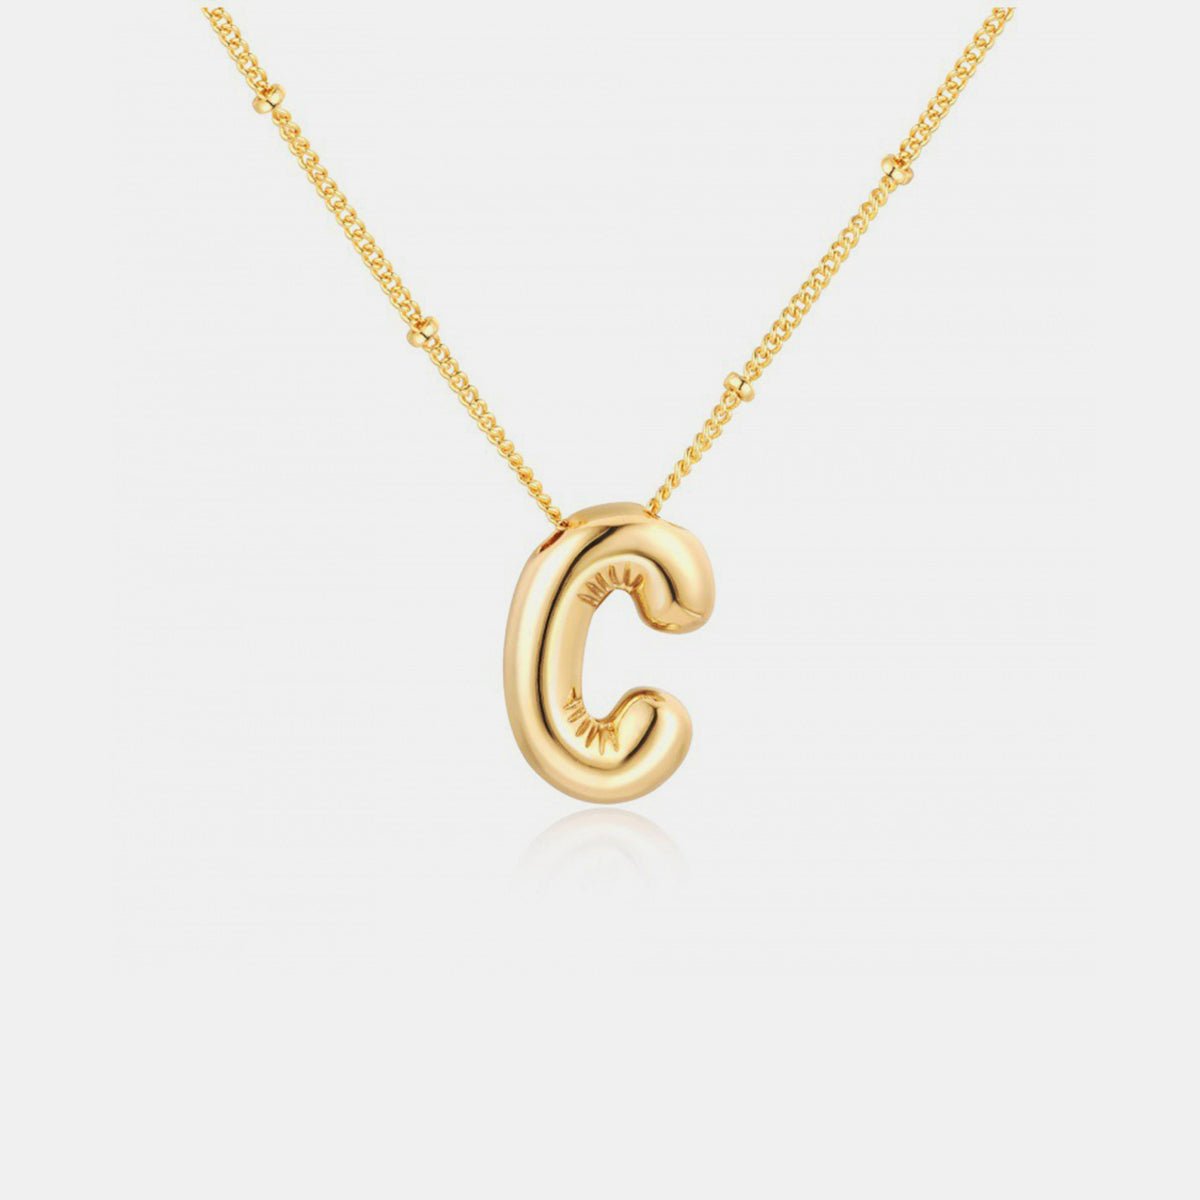 Bravada Gold-Plated Letter Pendant Necklace A-J Jewelry Gold-Plated Fashion Bravada